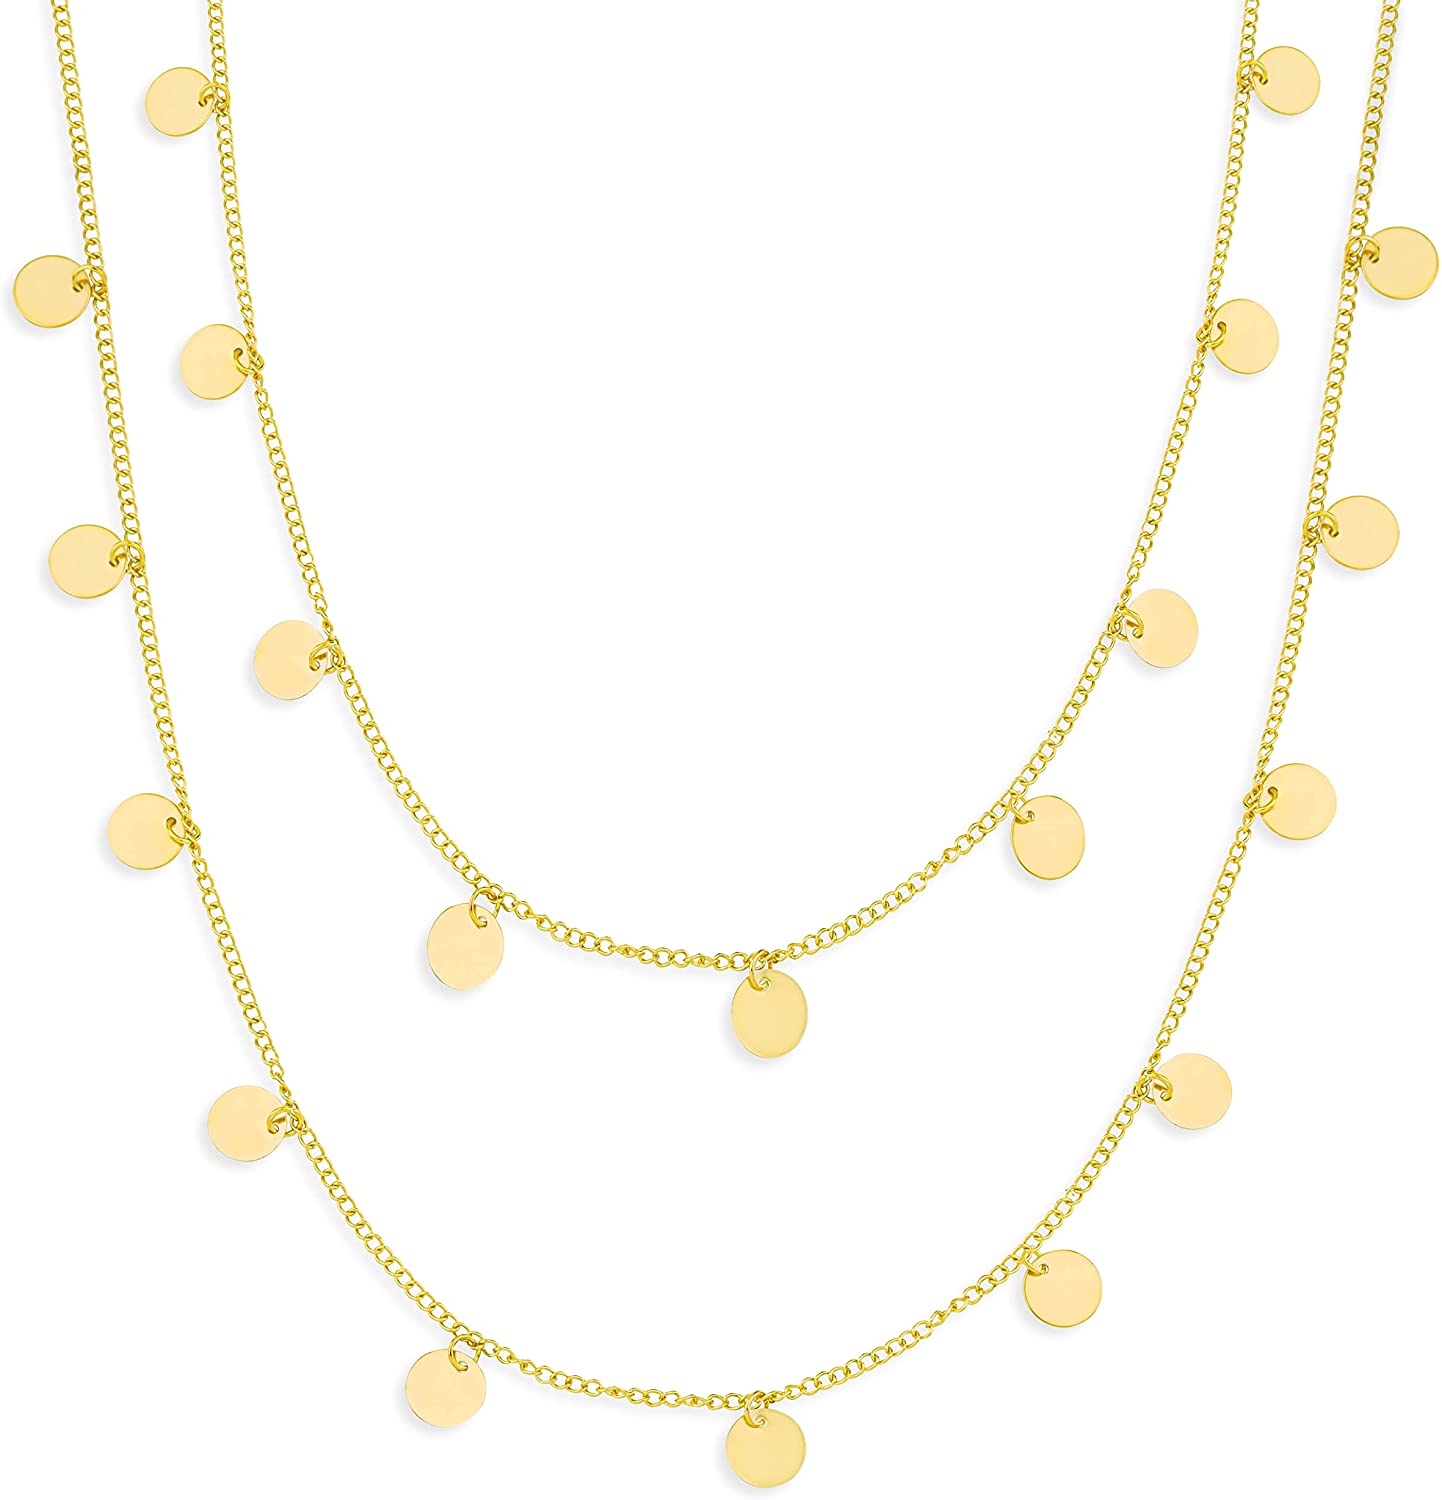 Dropship PAVOI 14K Gold Plated Dainty Layering Necklaces For Women, Snake  Chain; Curb Link; Paperclip Layered Chains to Sell Online at a Lower Price